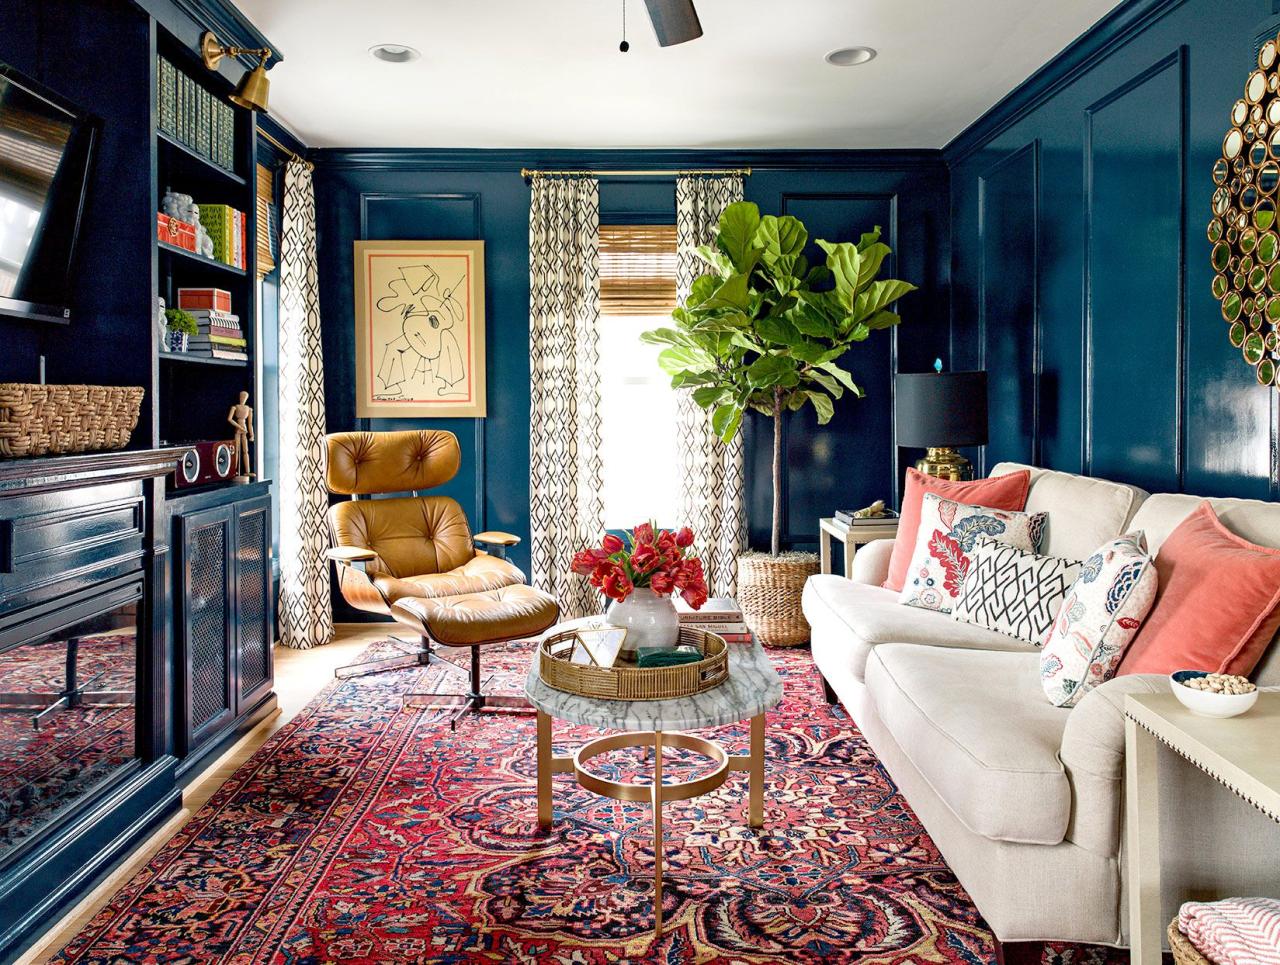 17 Distinctive Ways To Decorate With Blue Walls In Every Shade